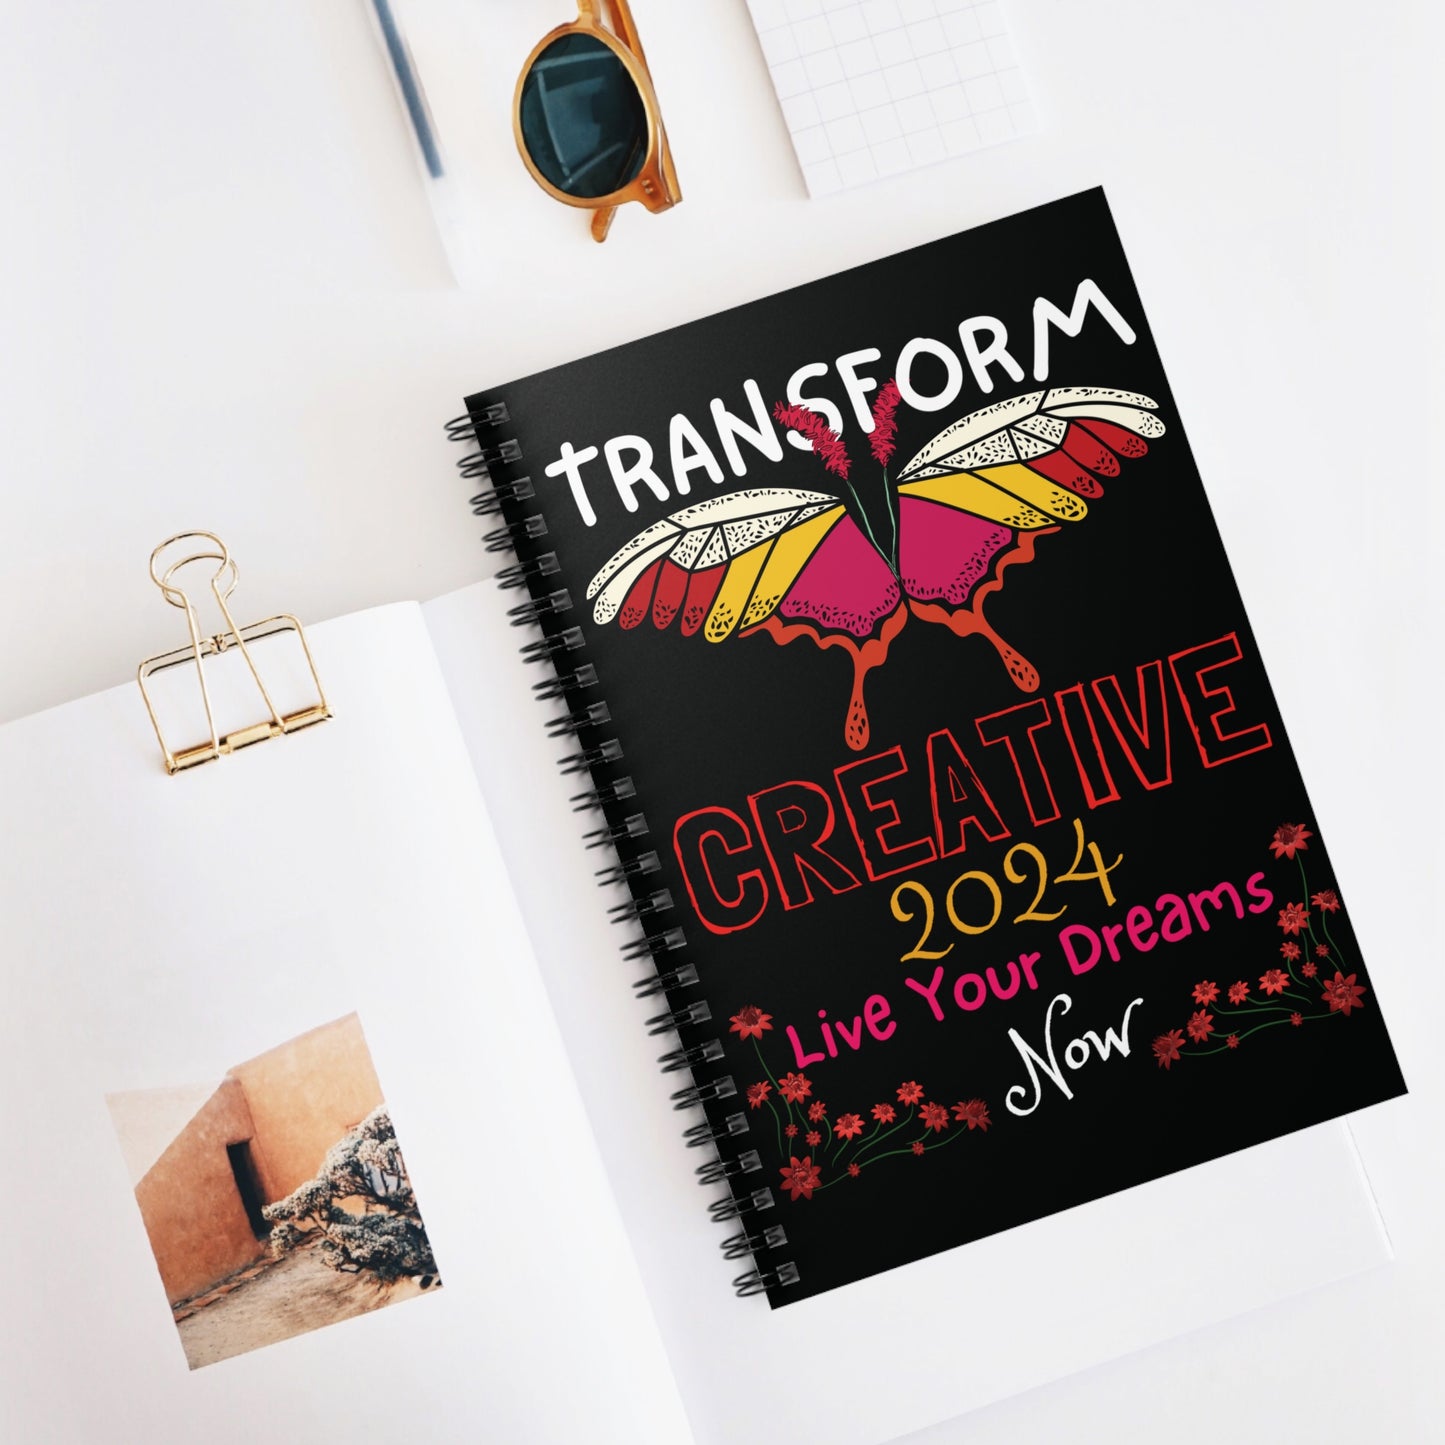 Transform Creative 2024 Now Spiral Notebook - Ruled Line - Perfect Gift For Creatives